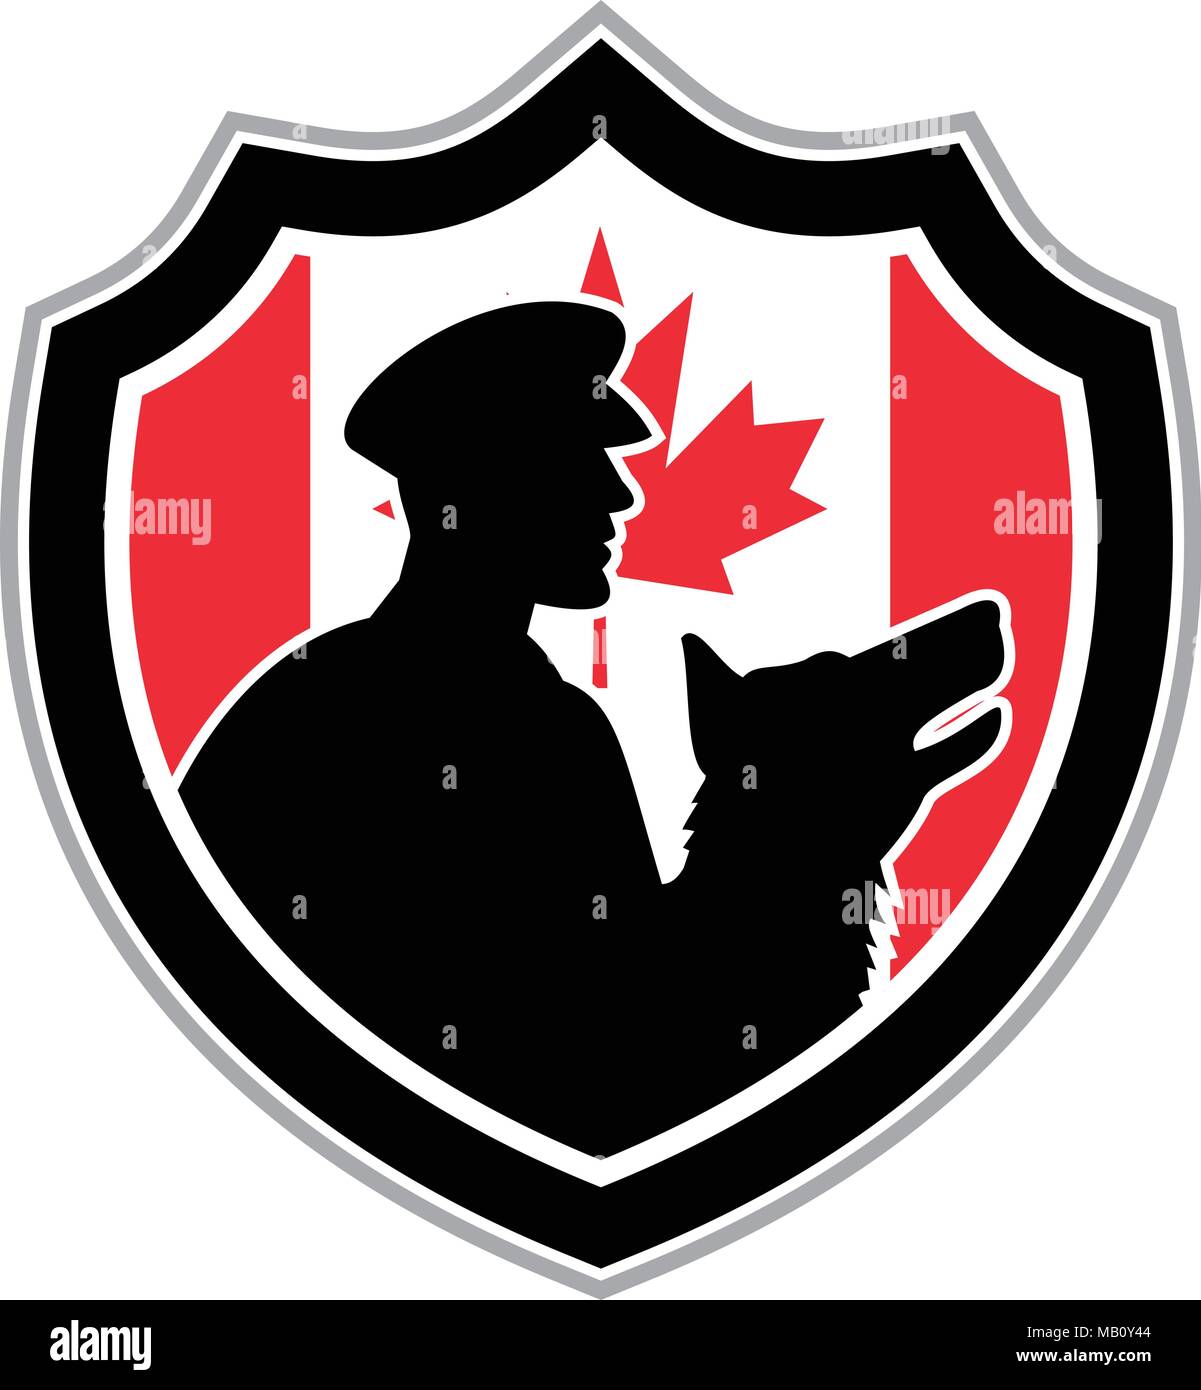 Icon retro style illustration of a Canadian police canine team showing a policeman and police dog silhouette viewed from side with Canada maple leaf . Stock Vector